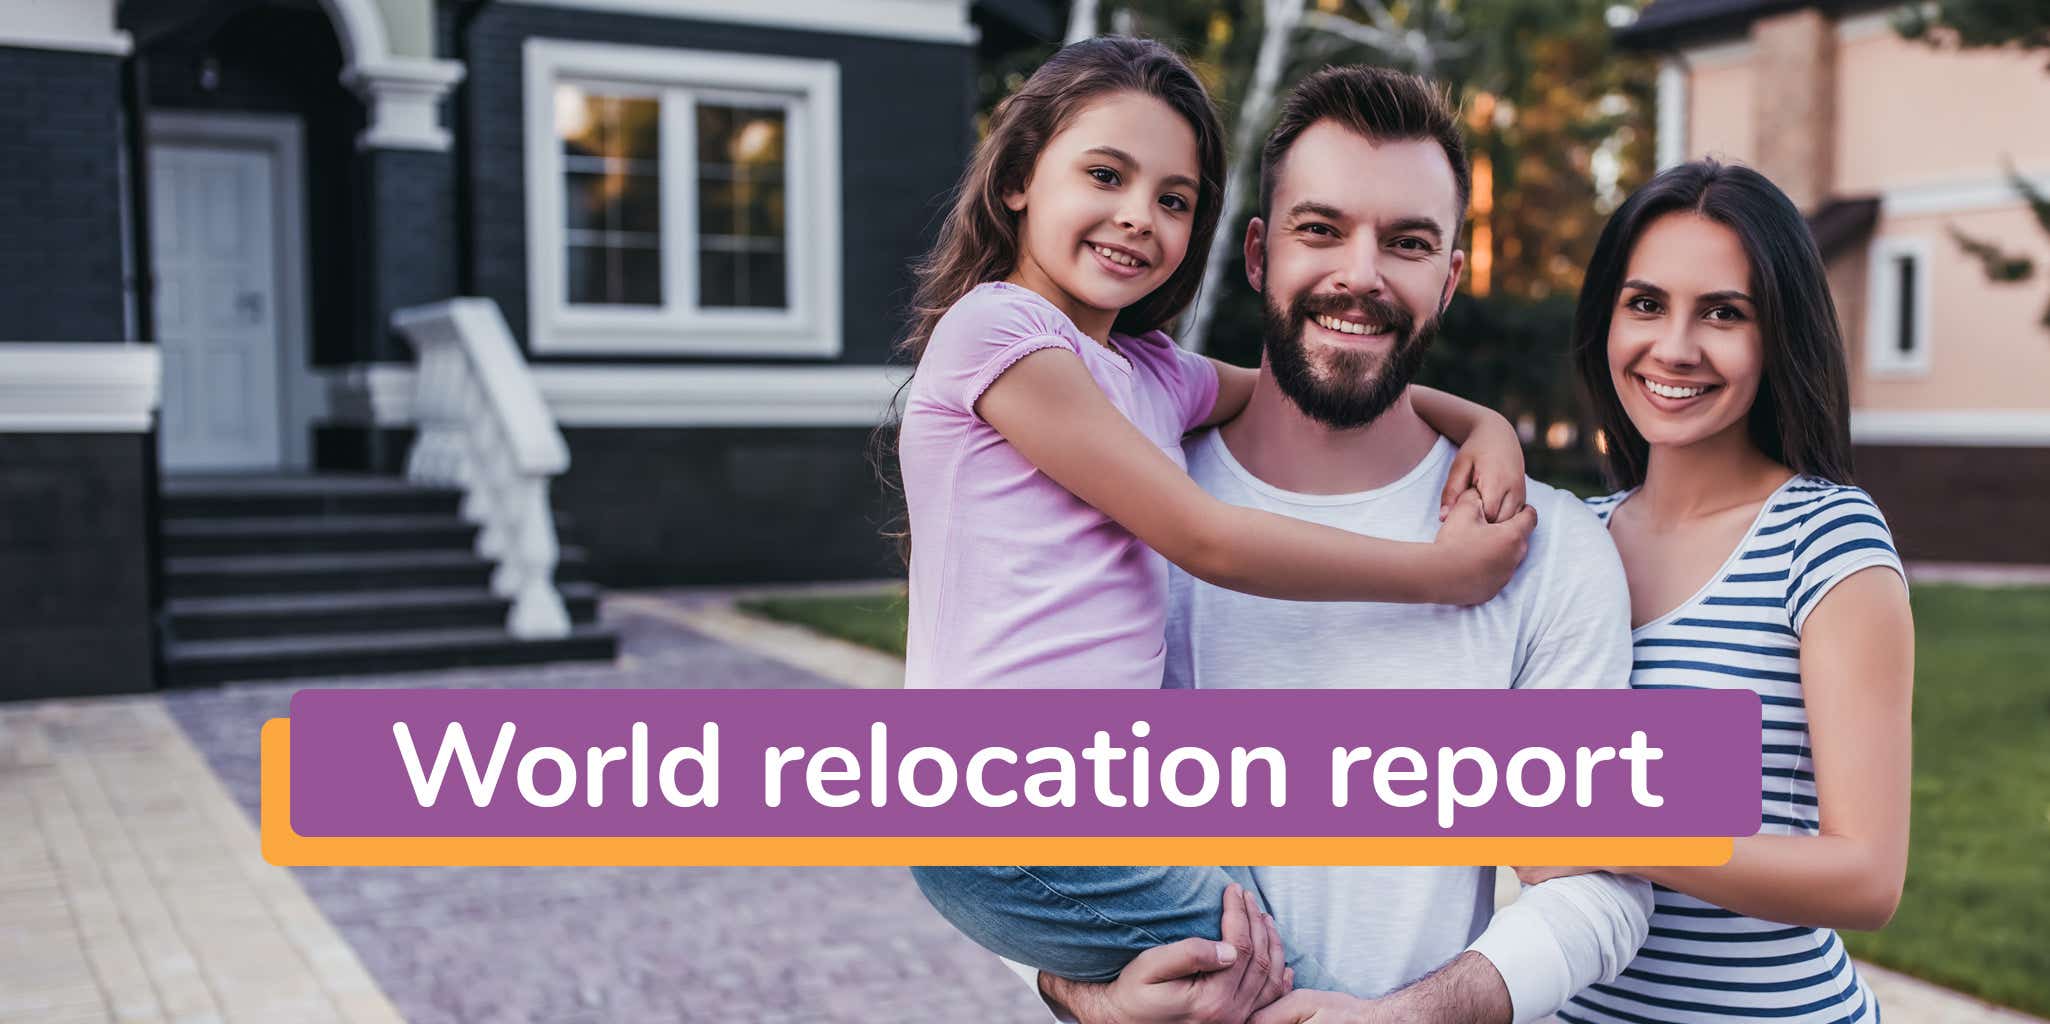 Image containing a family of three standing in front of a house with the title "world relocation report" as an overlay.